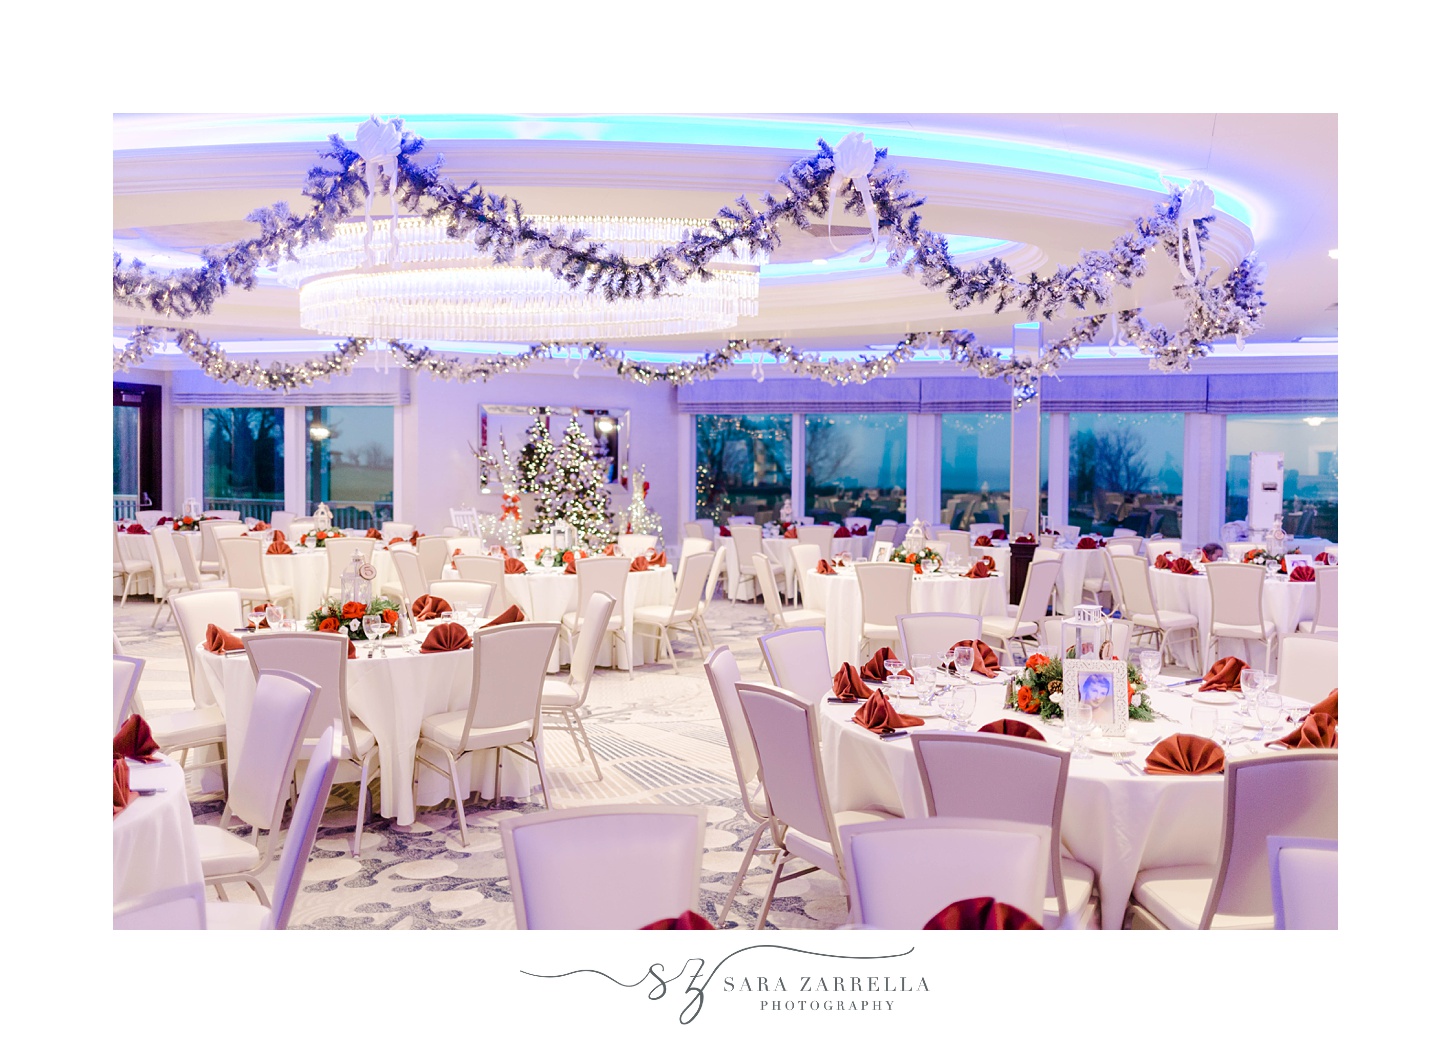 Christmas-inspired wedding reception with red and white details 